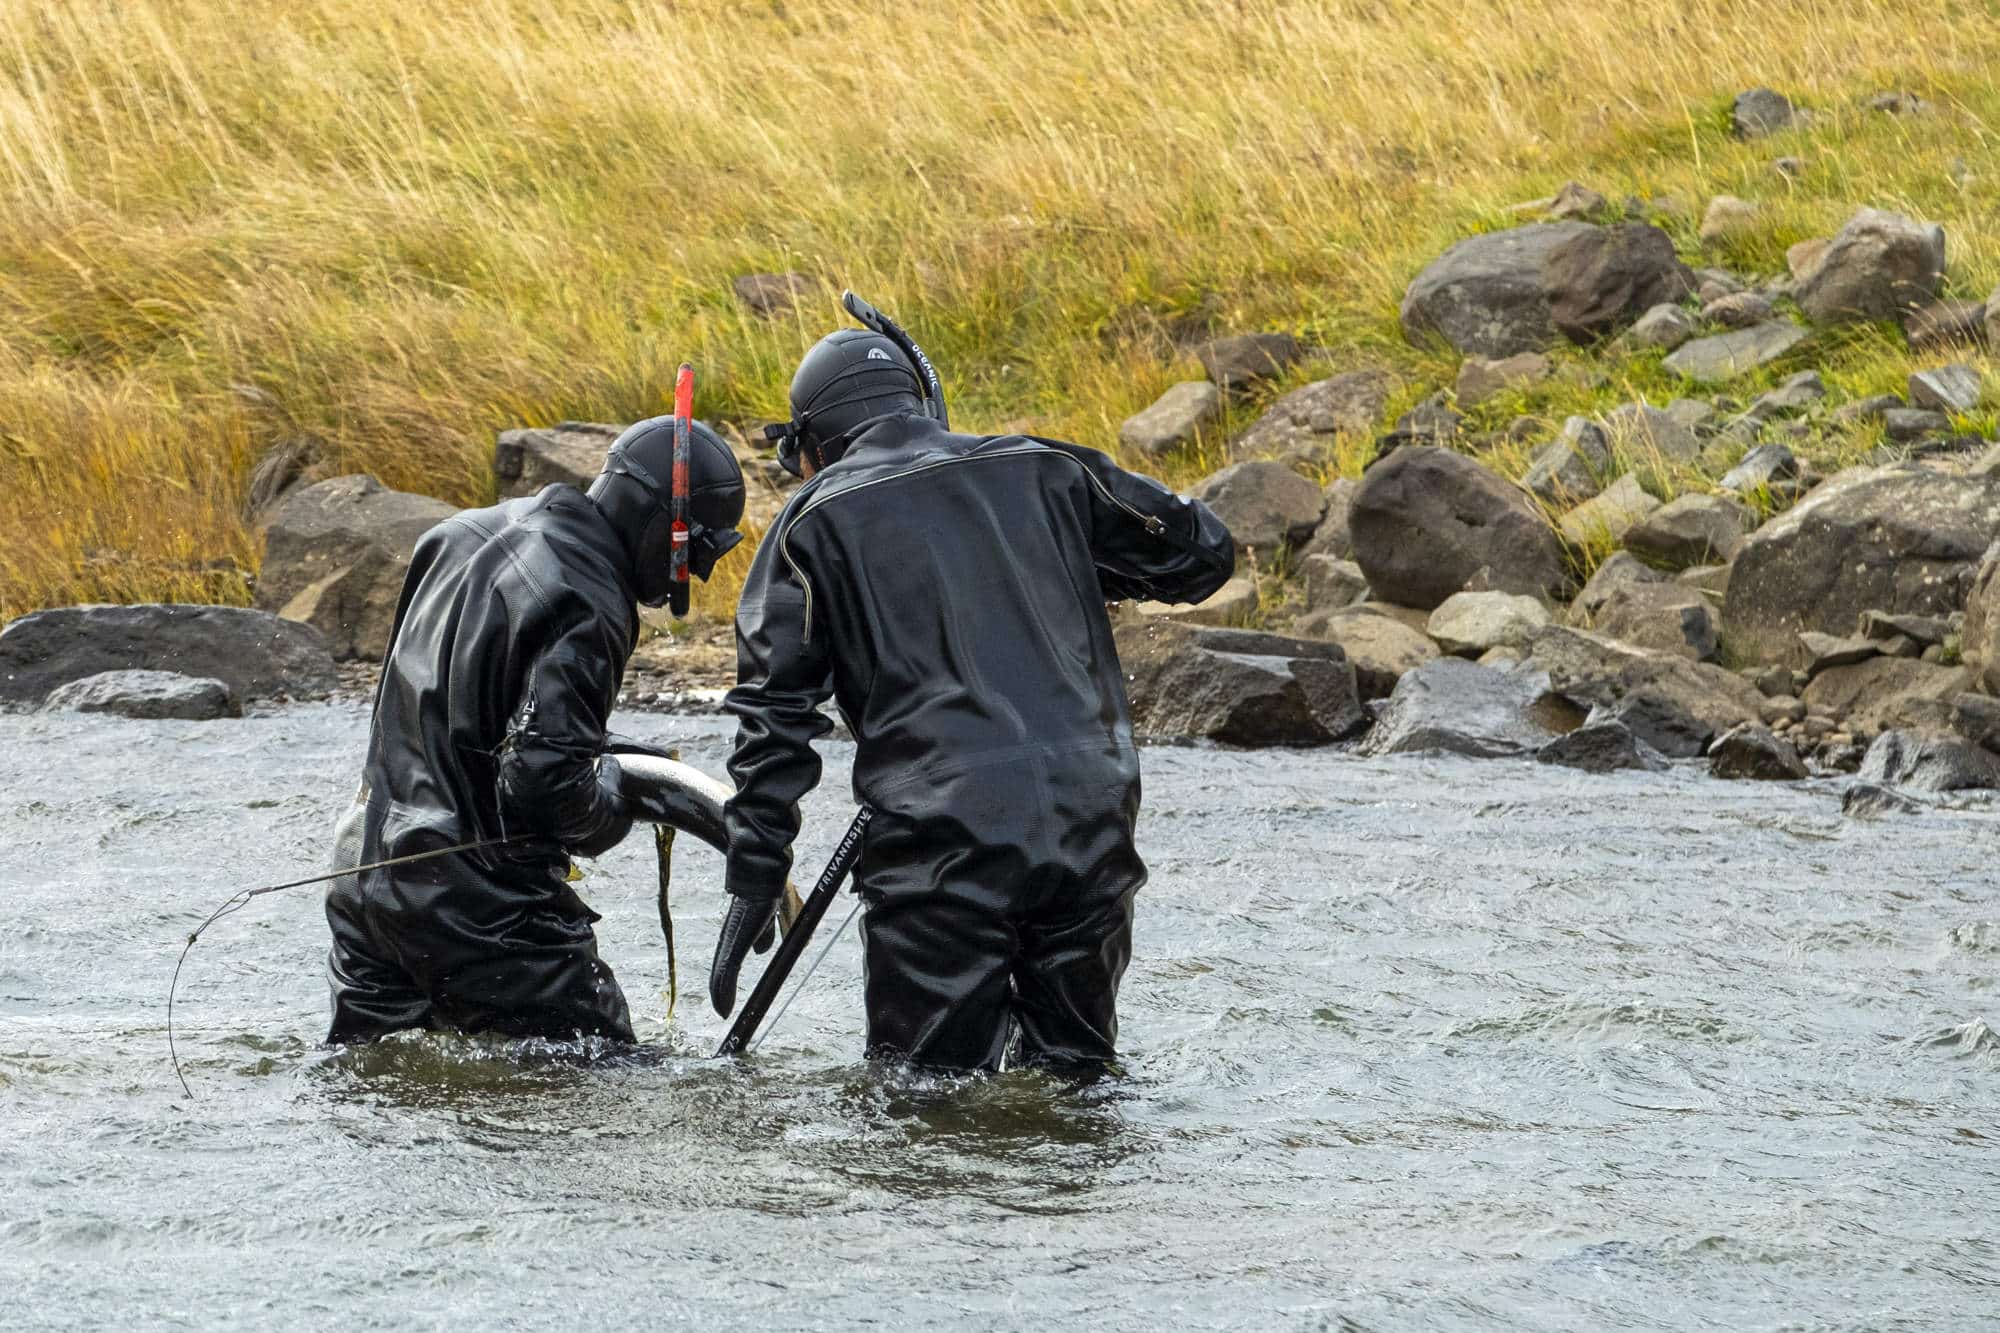 Golli. Norwegian divers catch escaped farmed salmon in an Icelandic river, October 2023